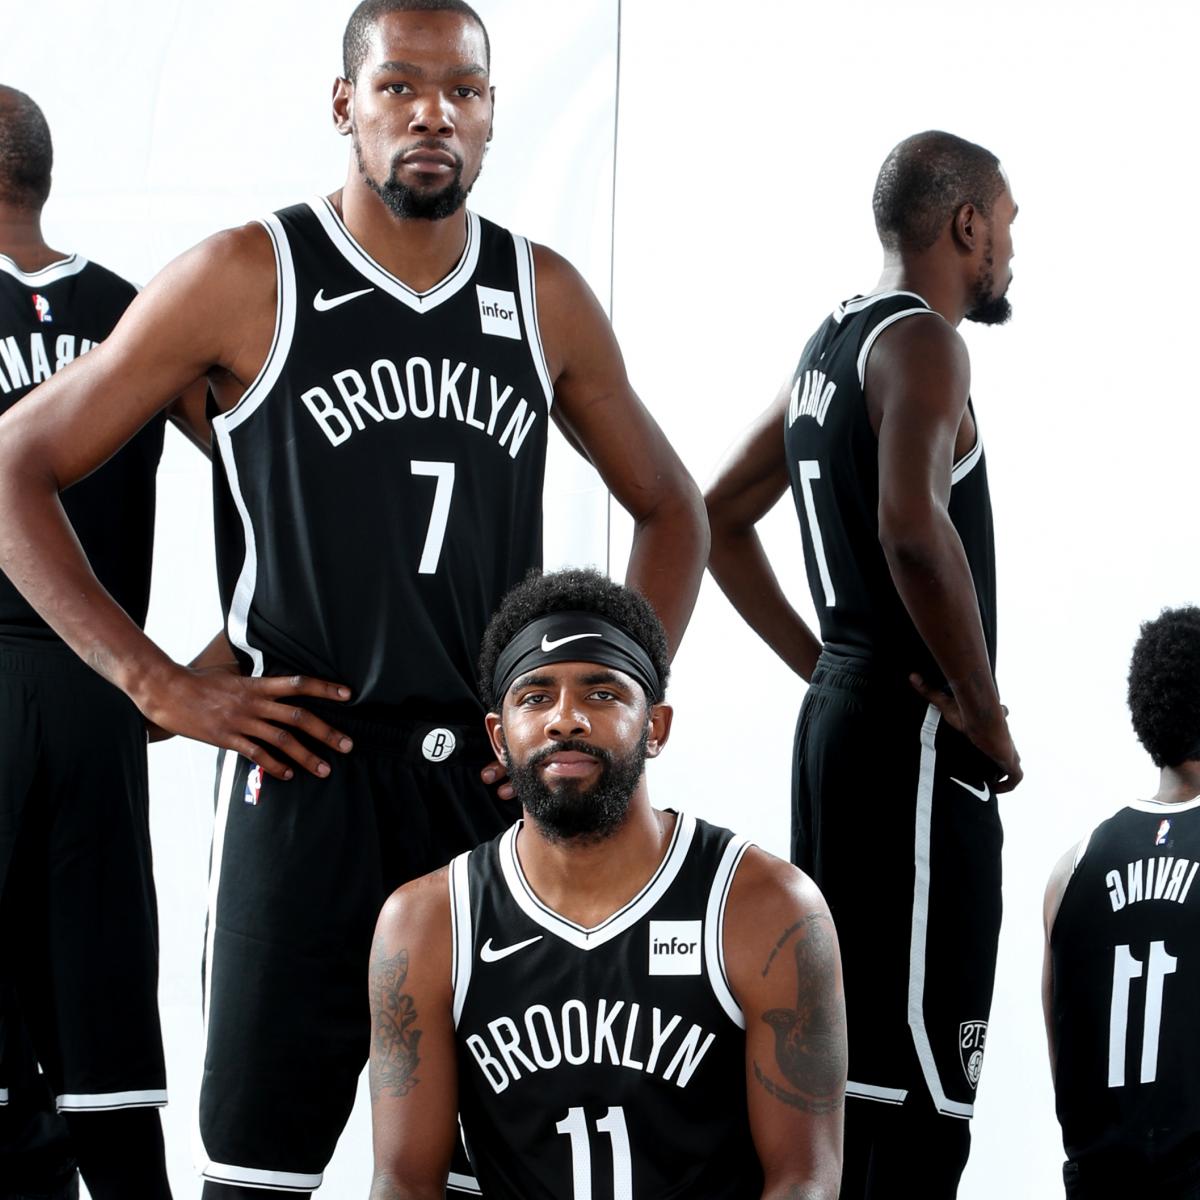 The Brooklyn Nets could be the best three-point shooting team in